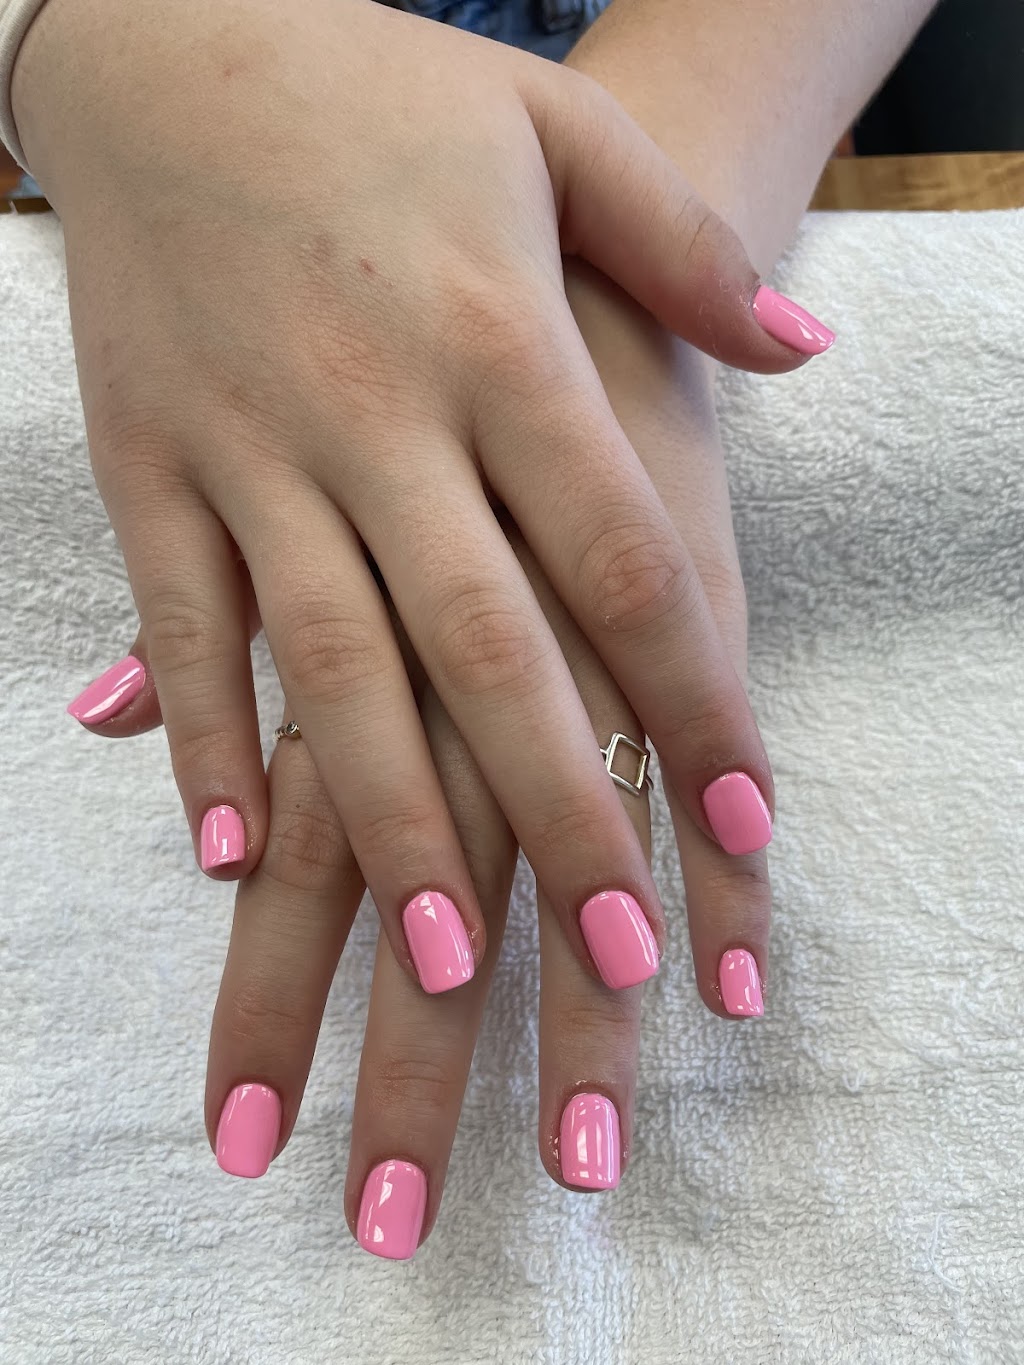 Norma s Nails Spa | 855 Forest Rd, Northford, CT 06472 | Phone: (203) 208-2790